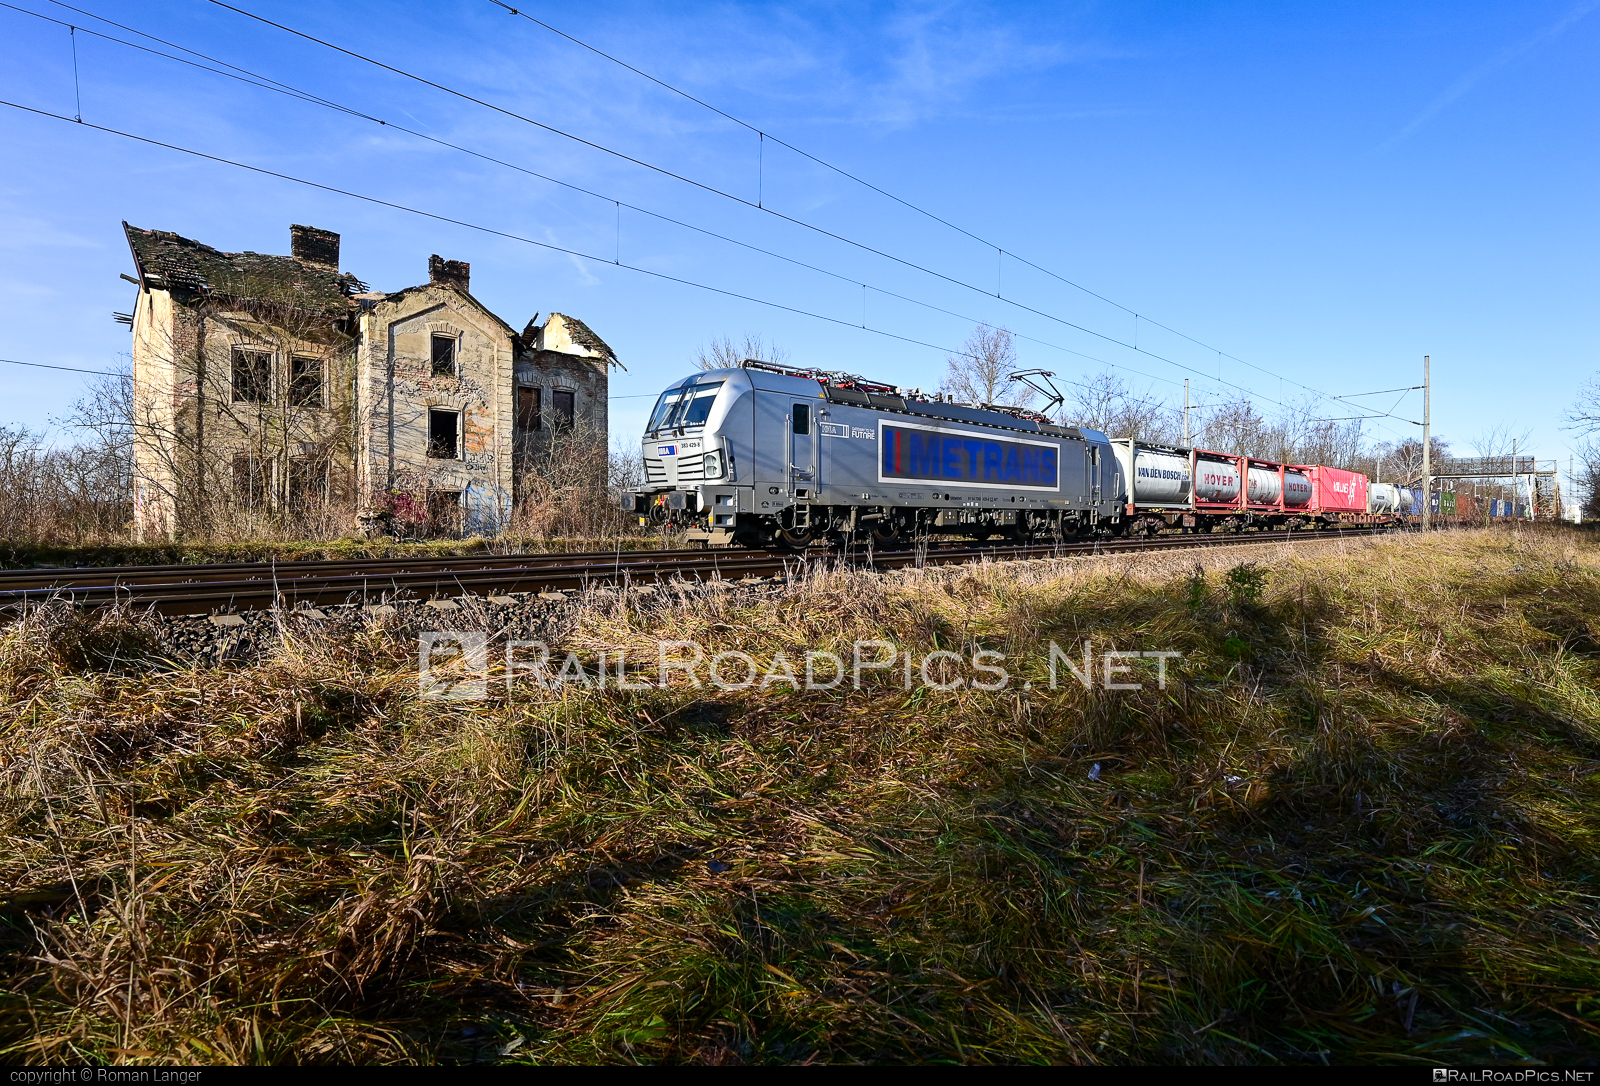 Siemens Vectron MS - 383 429-8 operated by METRANS, a.s. #flatwagon #hhla #metrans #siemens #siemensVectron #siemensVectronMS #vectron #vectronMS